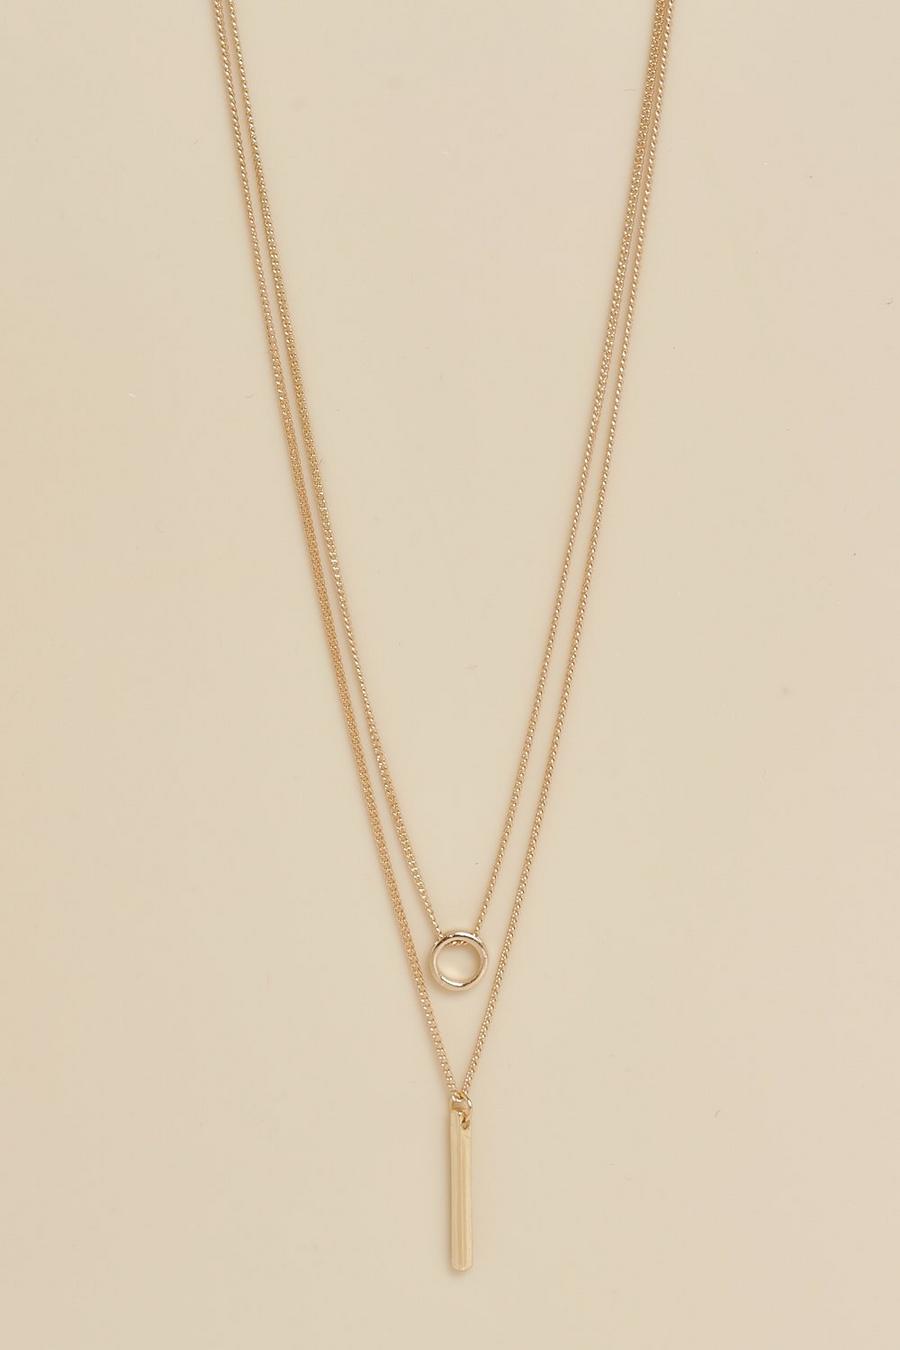 Gold Circle & Bar Simple Layered Necklace